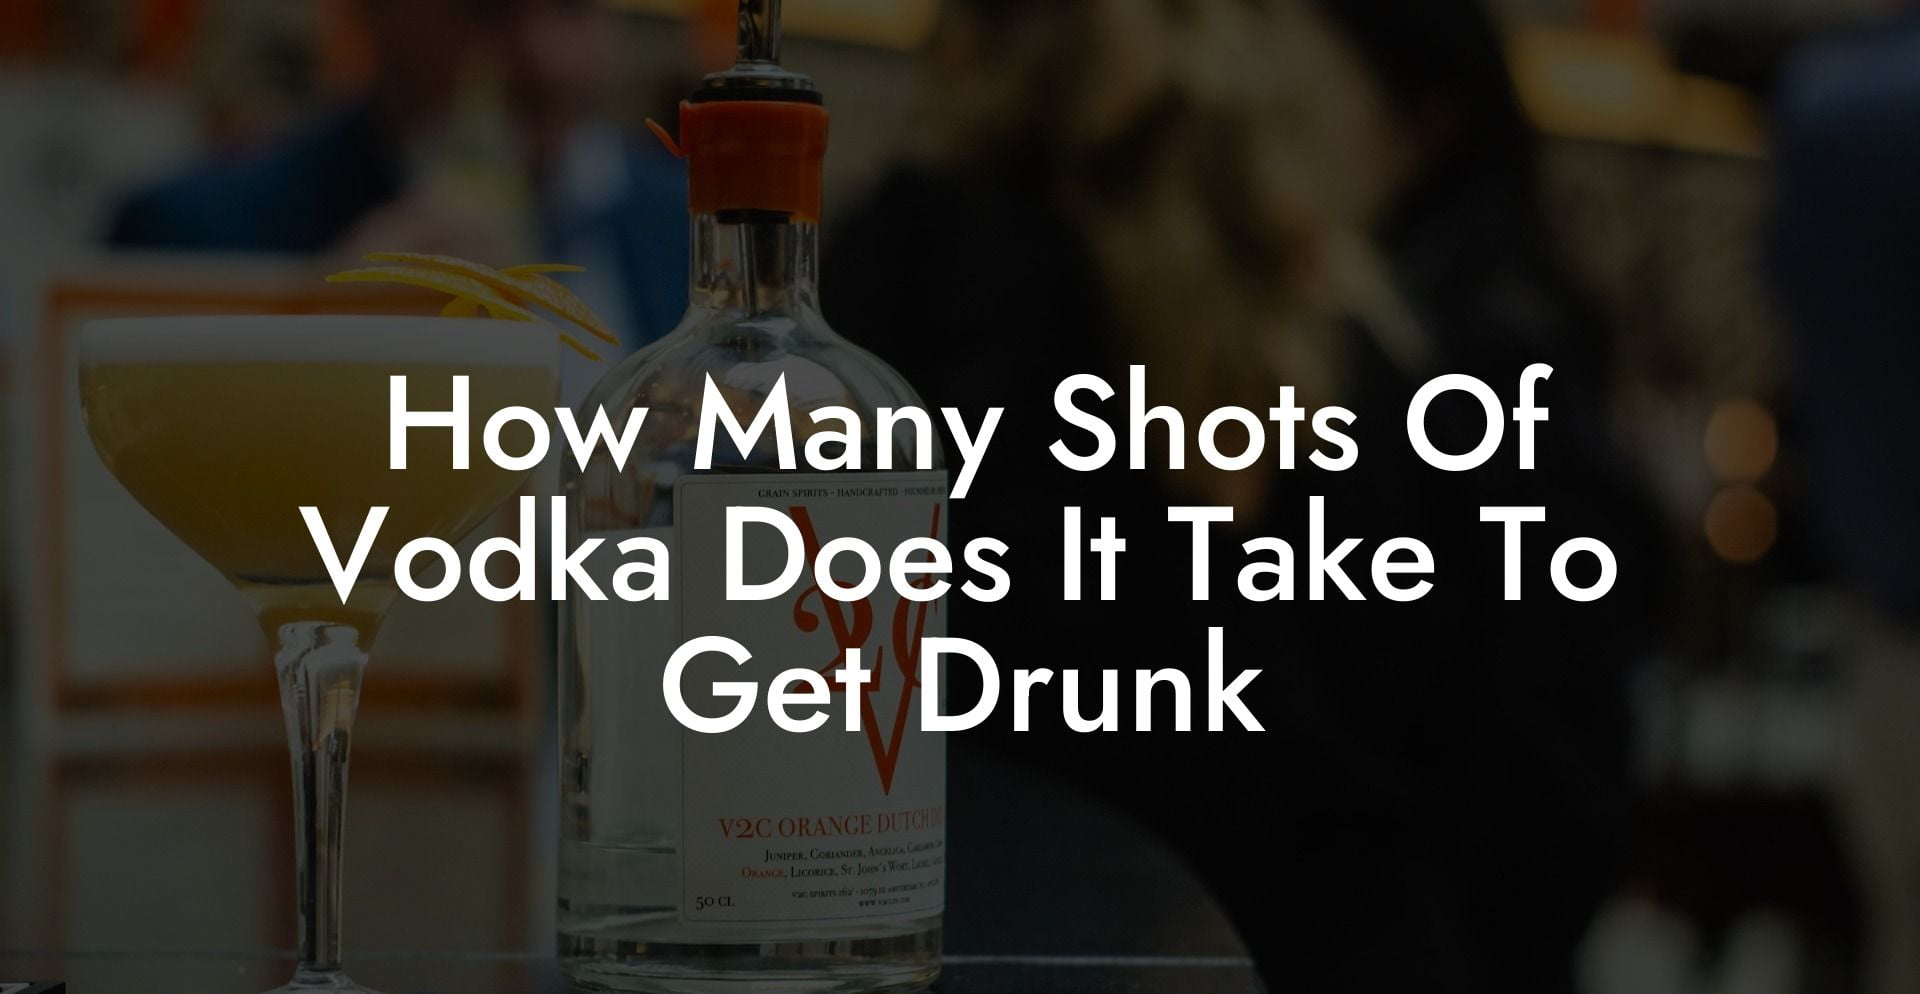 How Many Shots Of Vodka Does It Take To Get Drunk